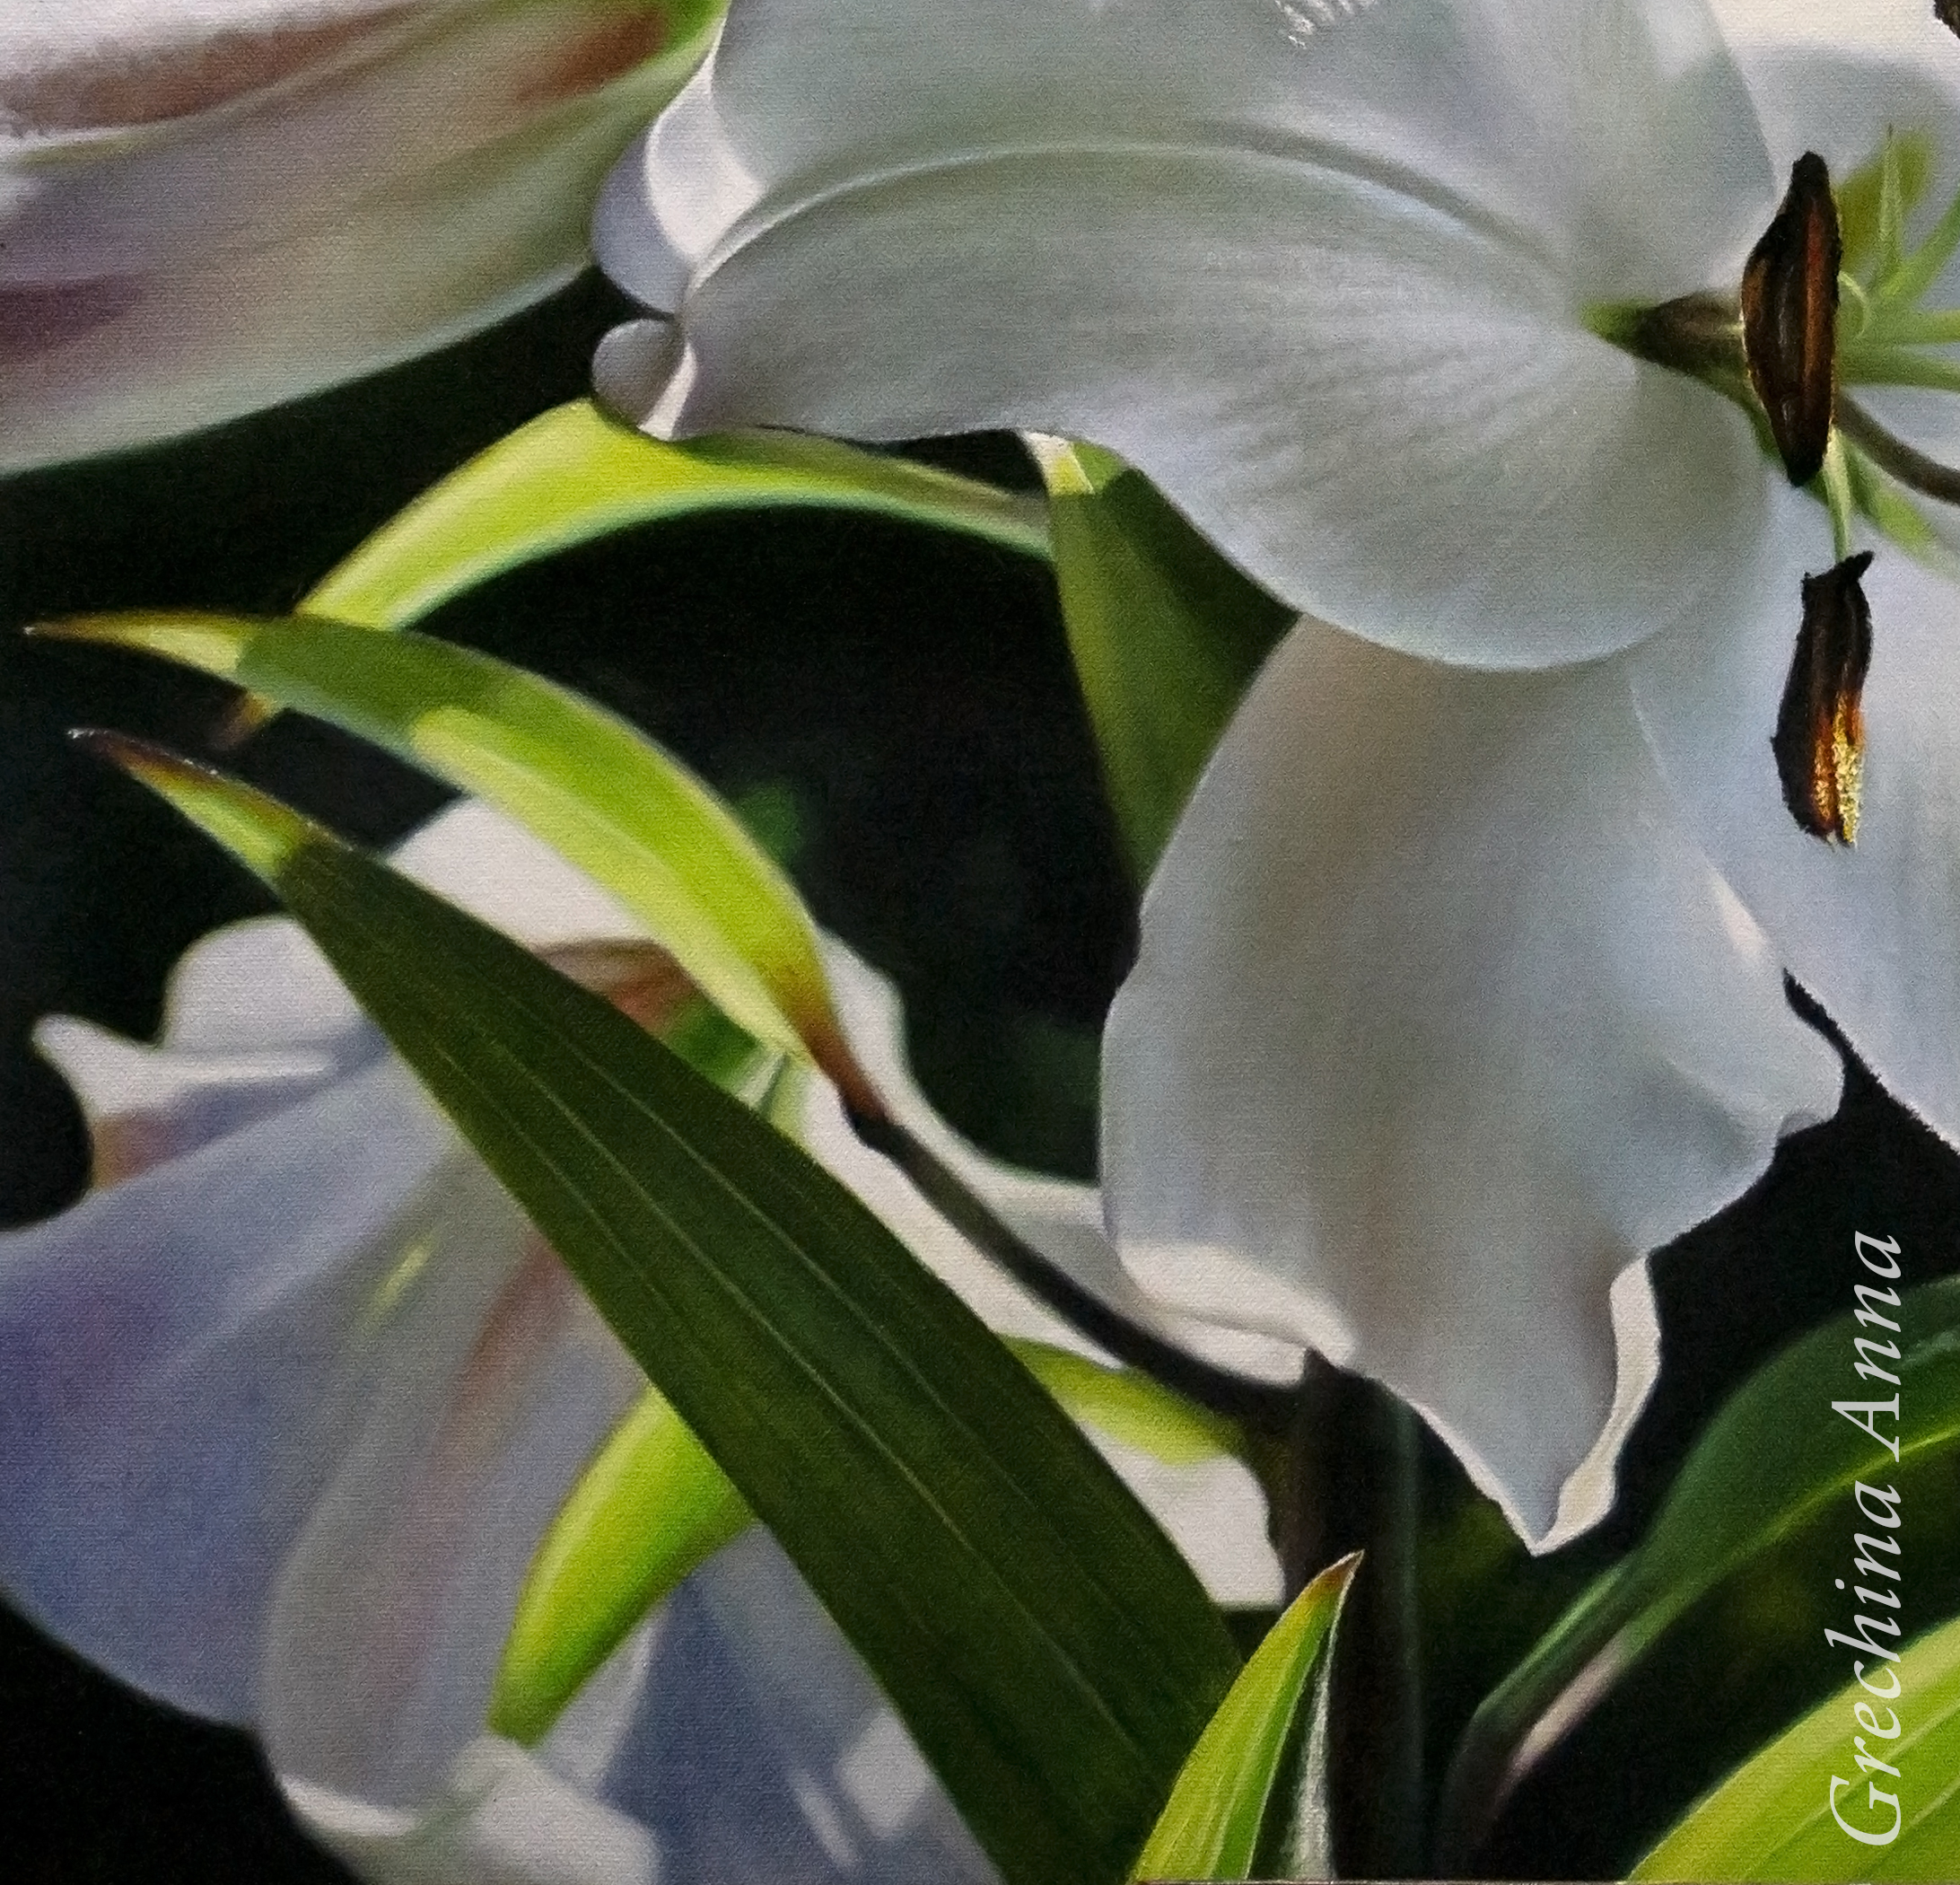 Photorealism, painting. Painting with a white lily. Artist Anna Grechina.